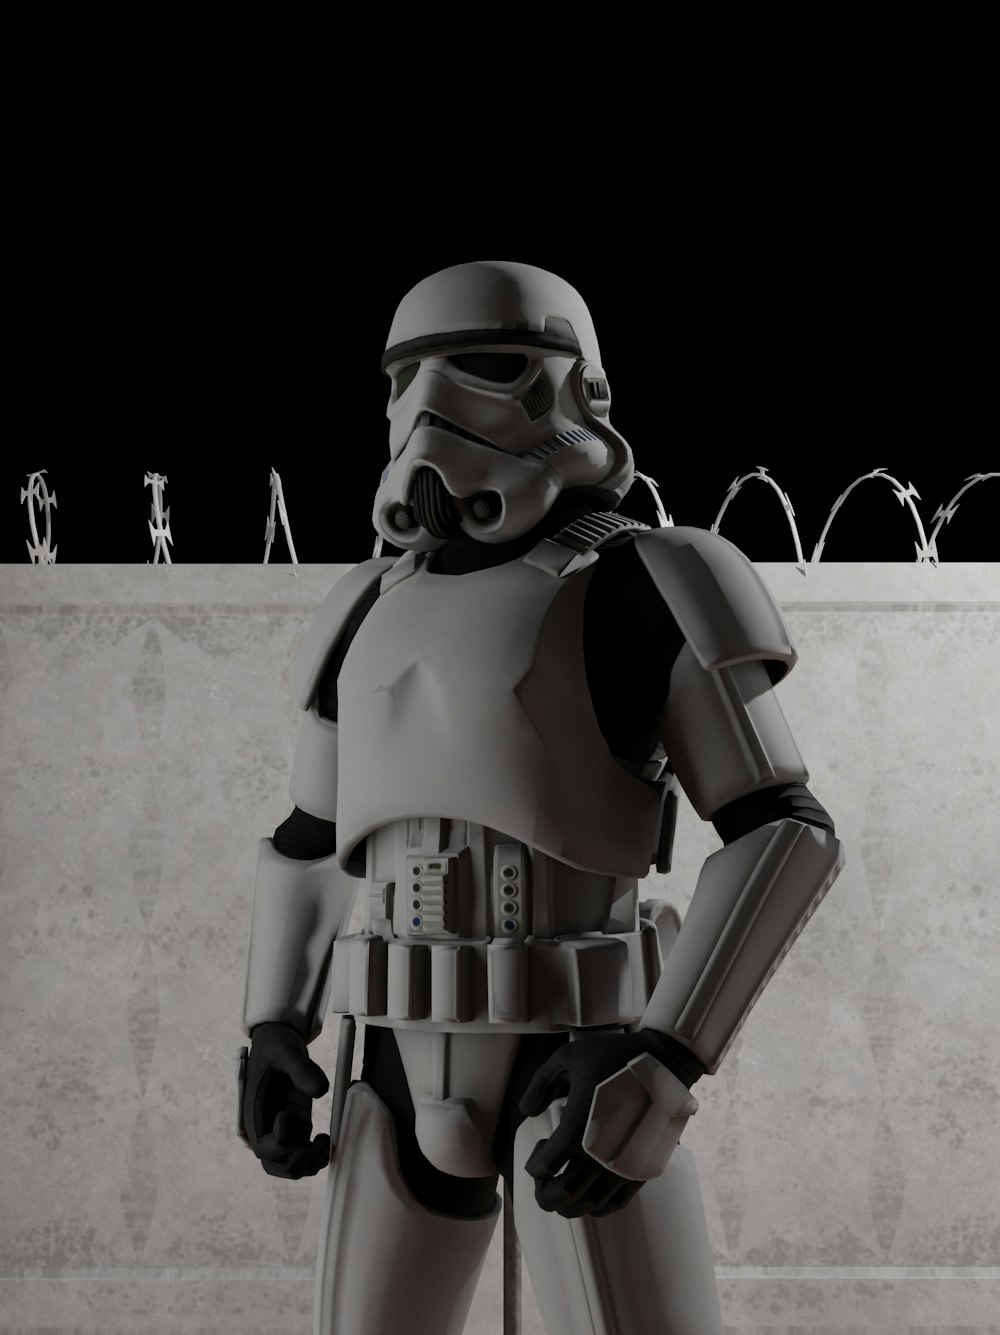 a storm trooper is standing in front of a wall